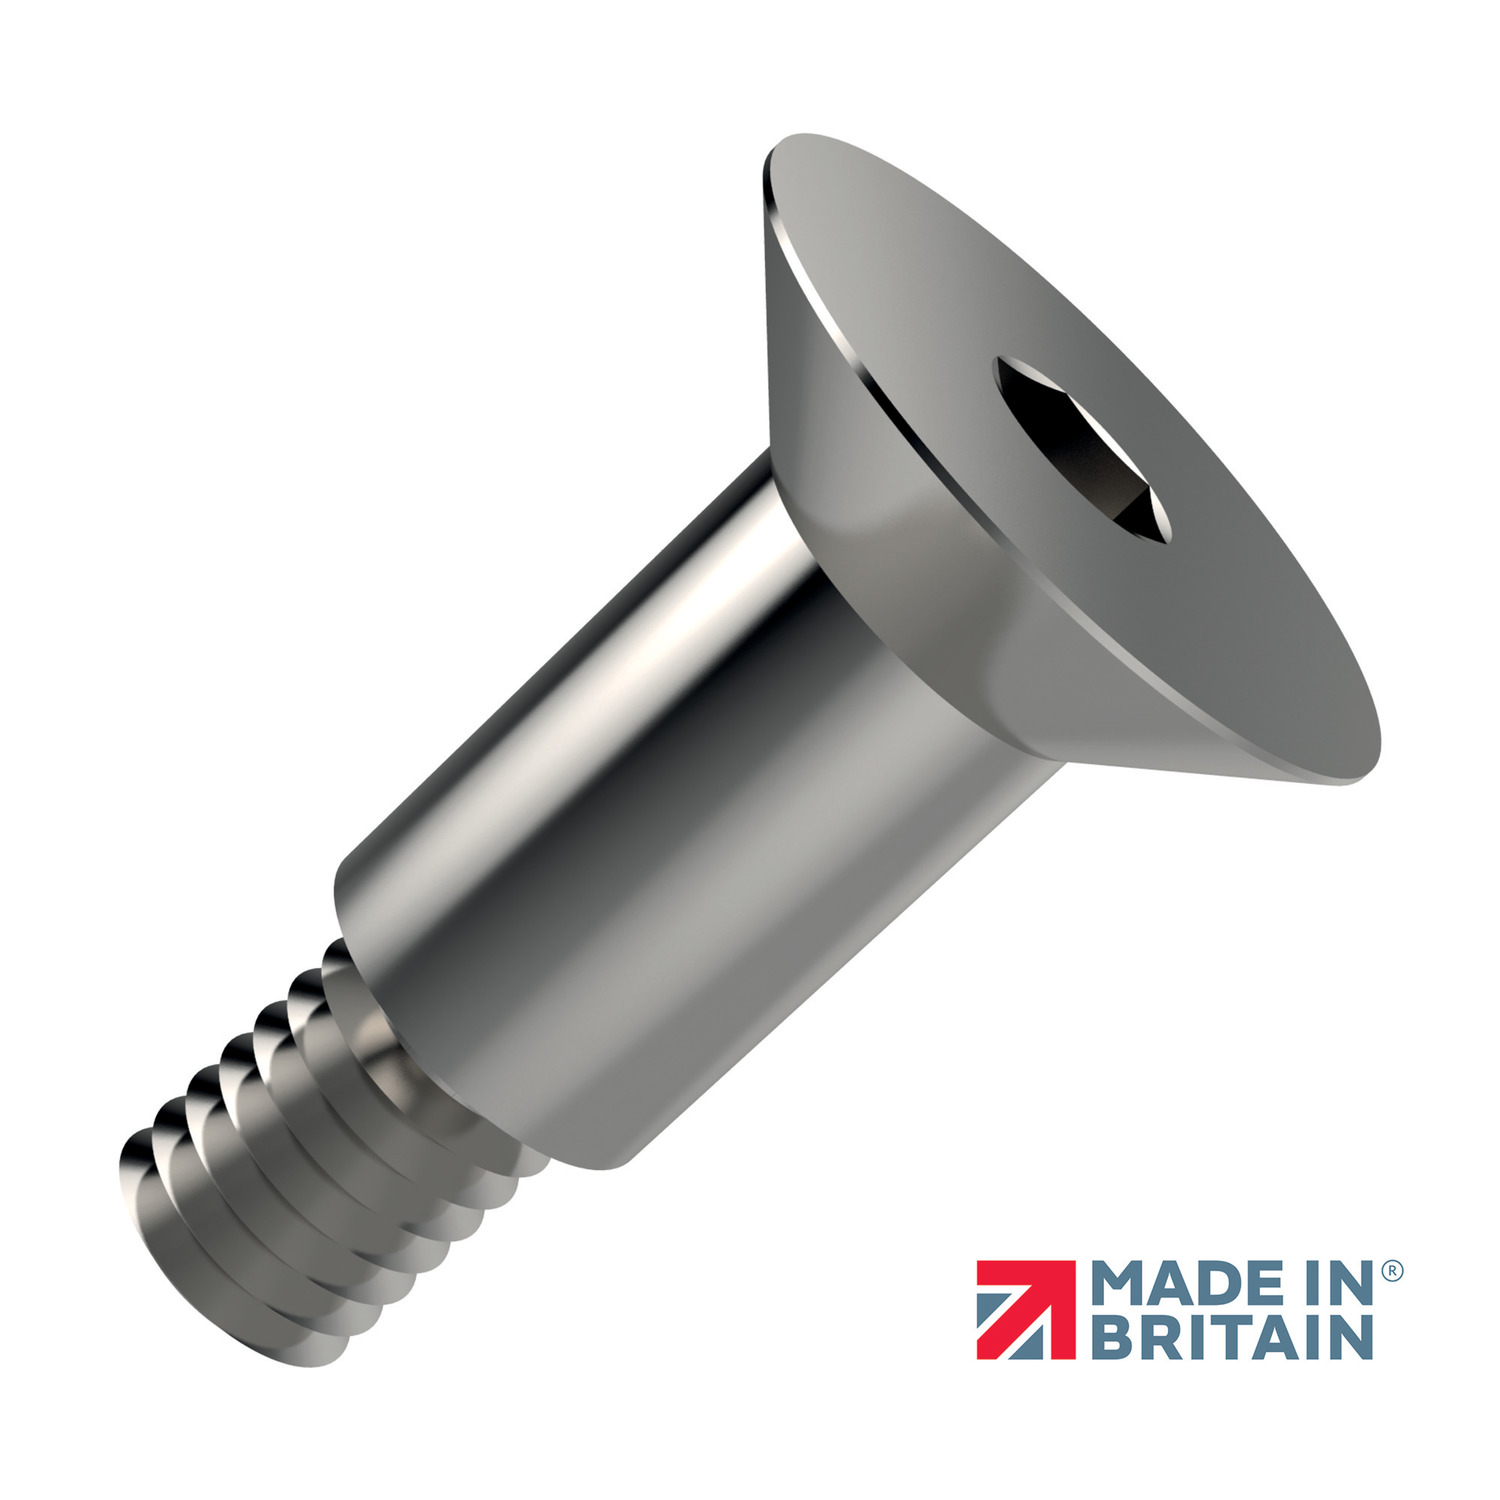 Shoulder Screws - Countersunk New to our range, socket countersunk shoulder screws in AISI 303 stainless steel.